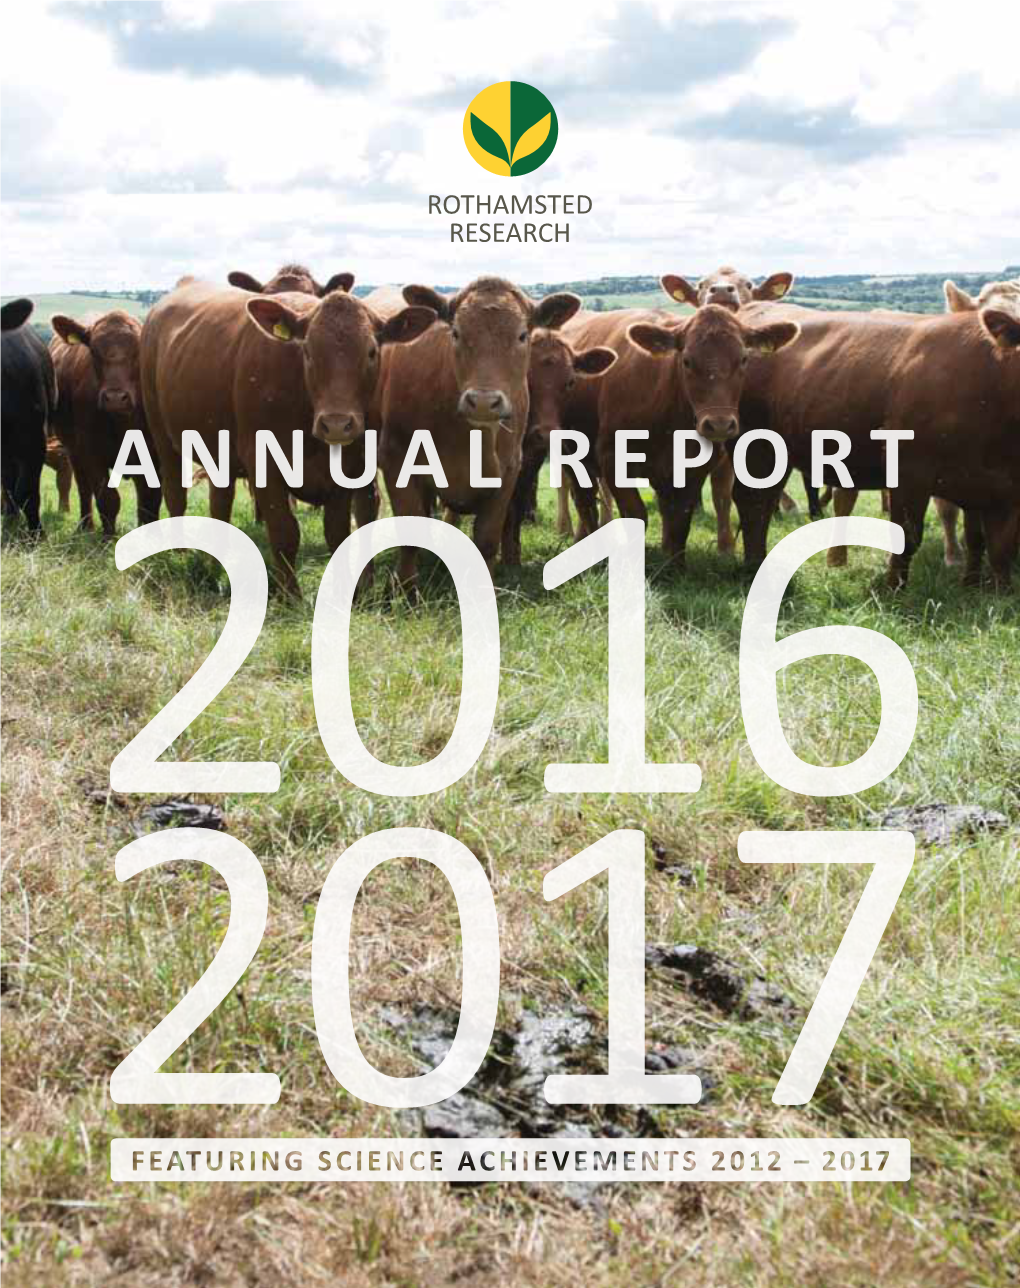 Institute's Annual Report, Released Online Today